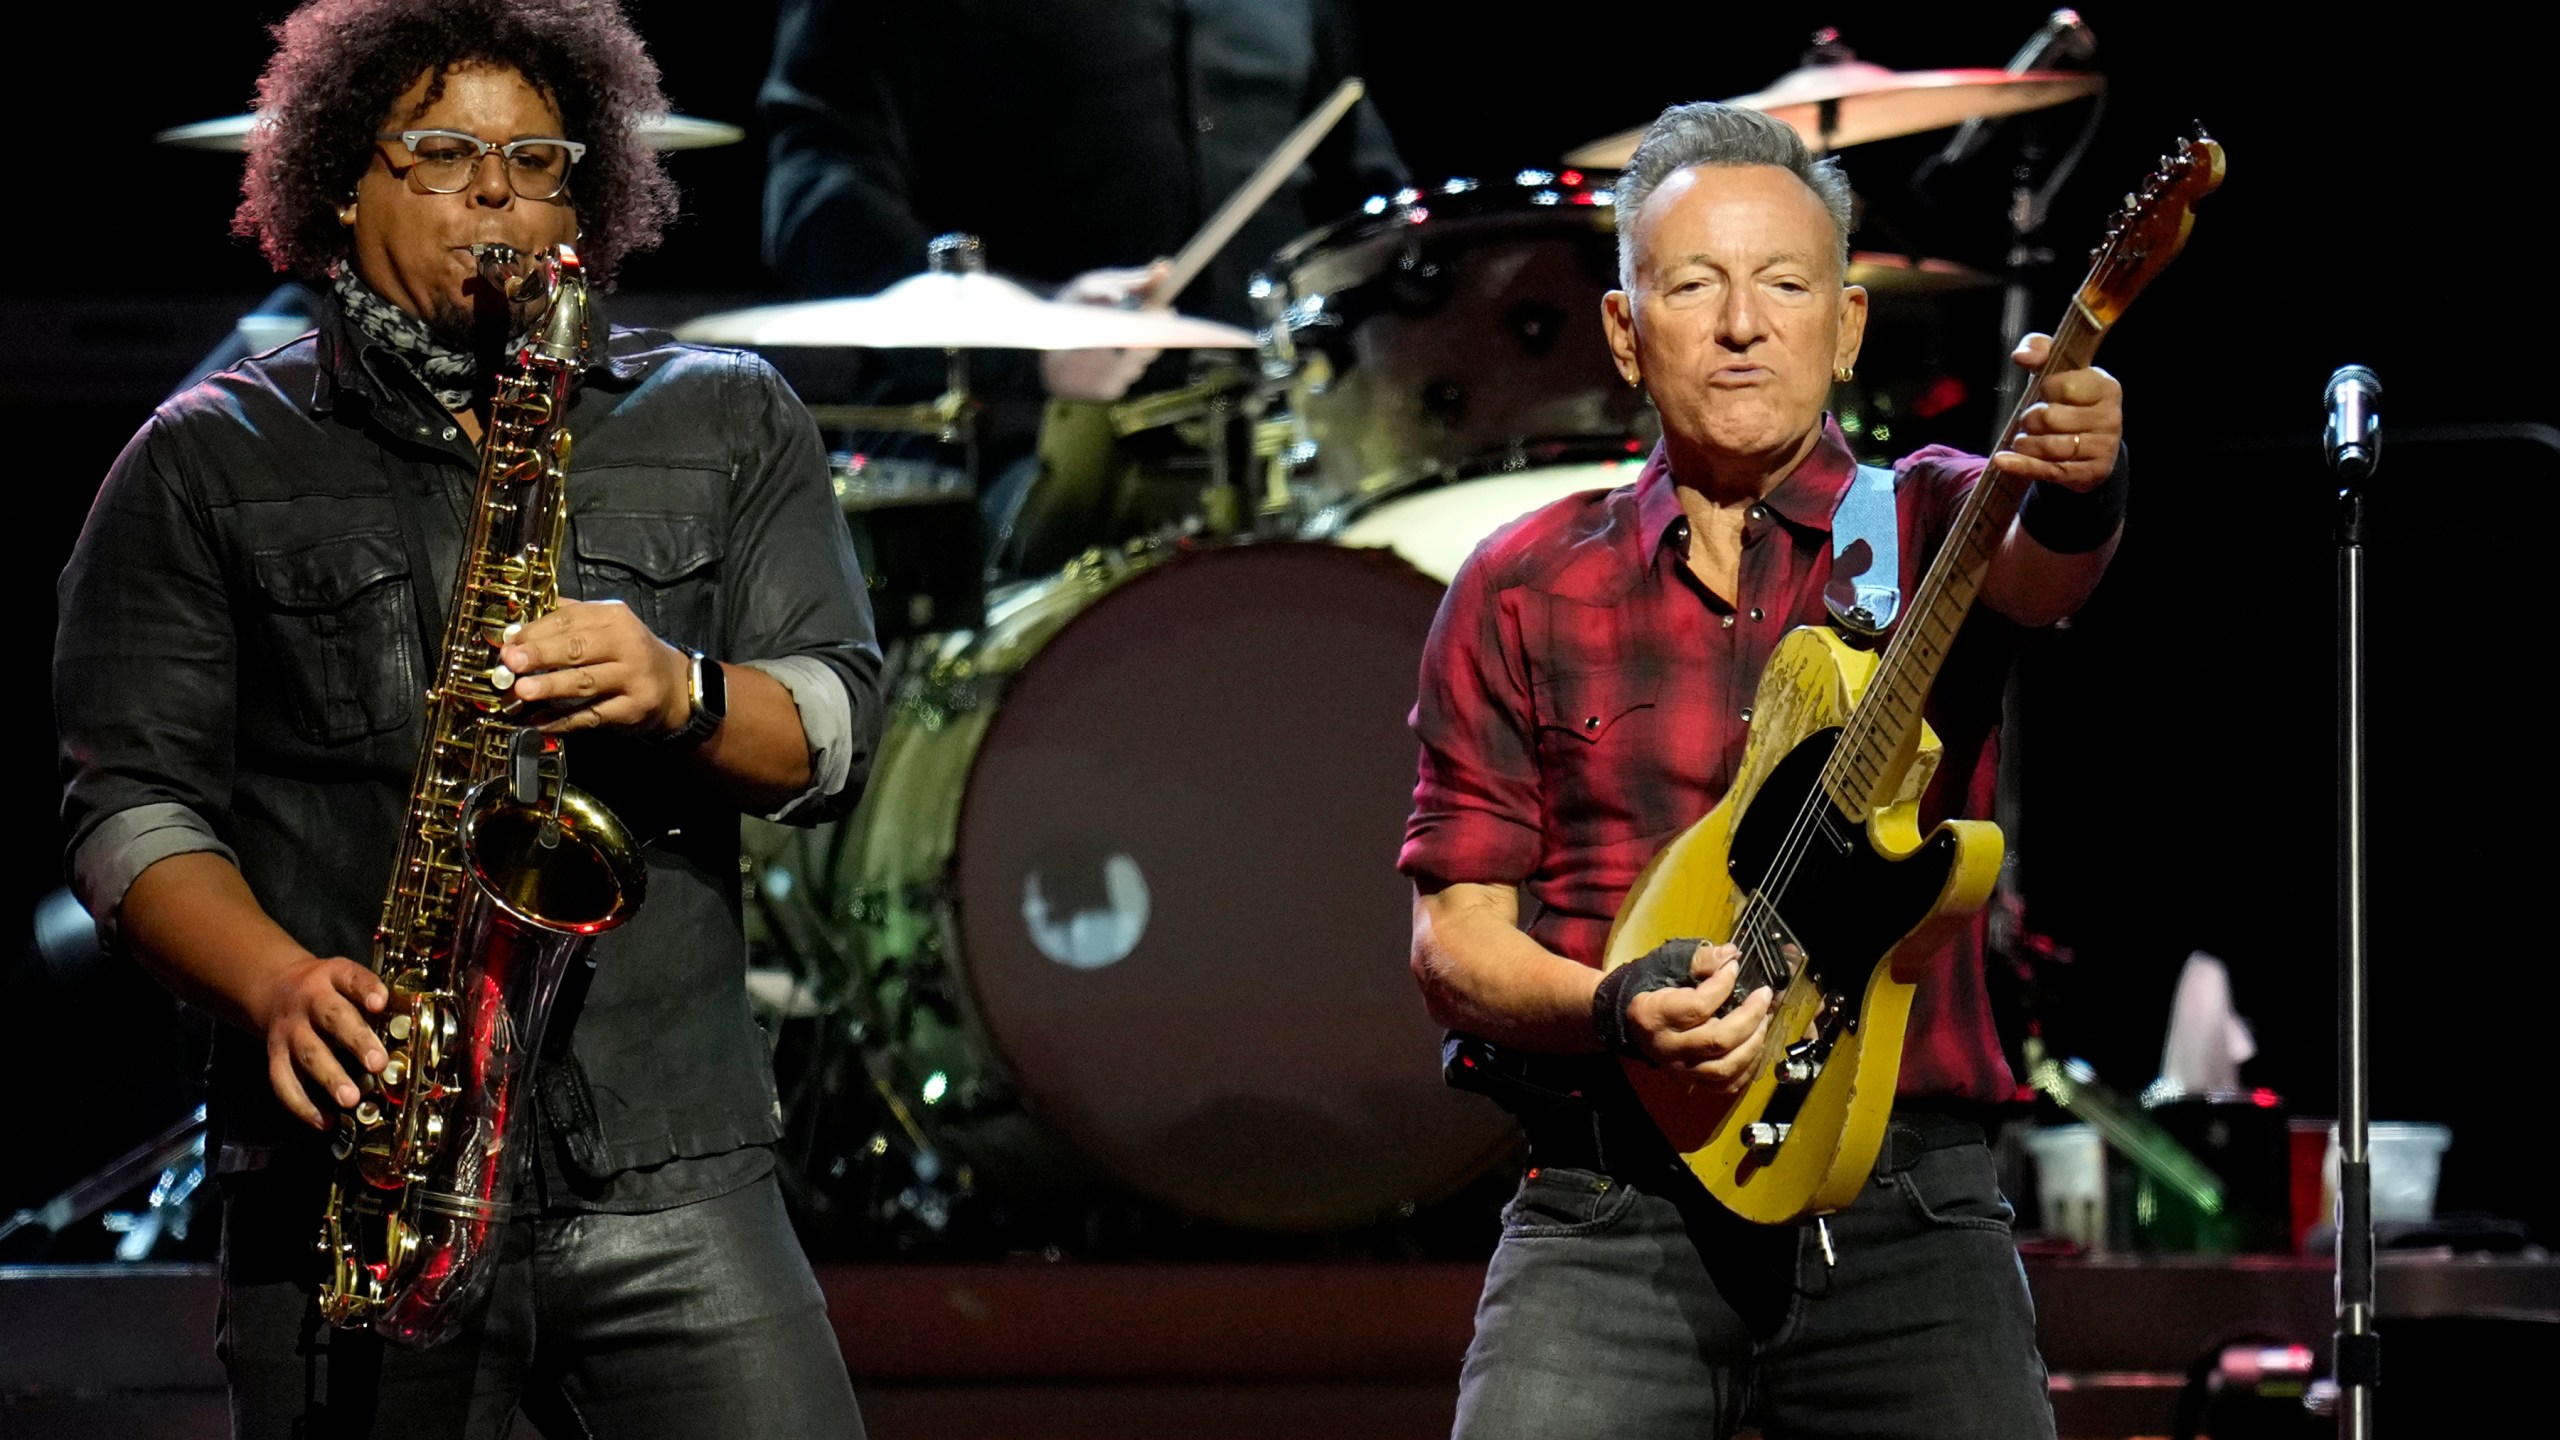 Bruce Springsteen, right, plays his guitar as Jake Clemons plays saxophone on stage during a concert of Bruce Springsteen and The E Street Band World Tour 2024 performance Tuesday, March 19, 2024, in Phoenix. (AP Photo/Ross D. Franklin)